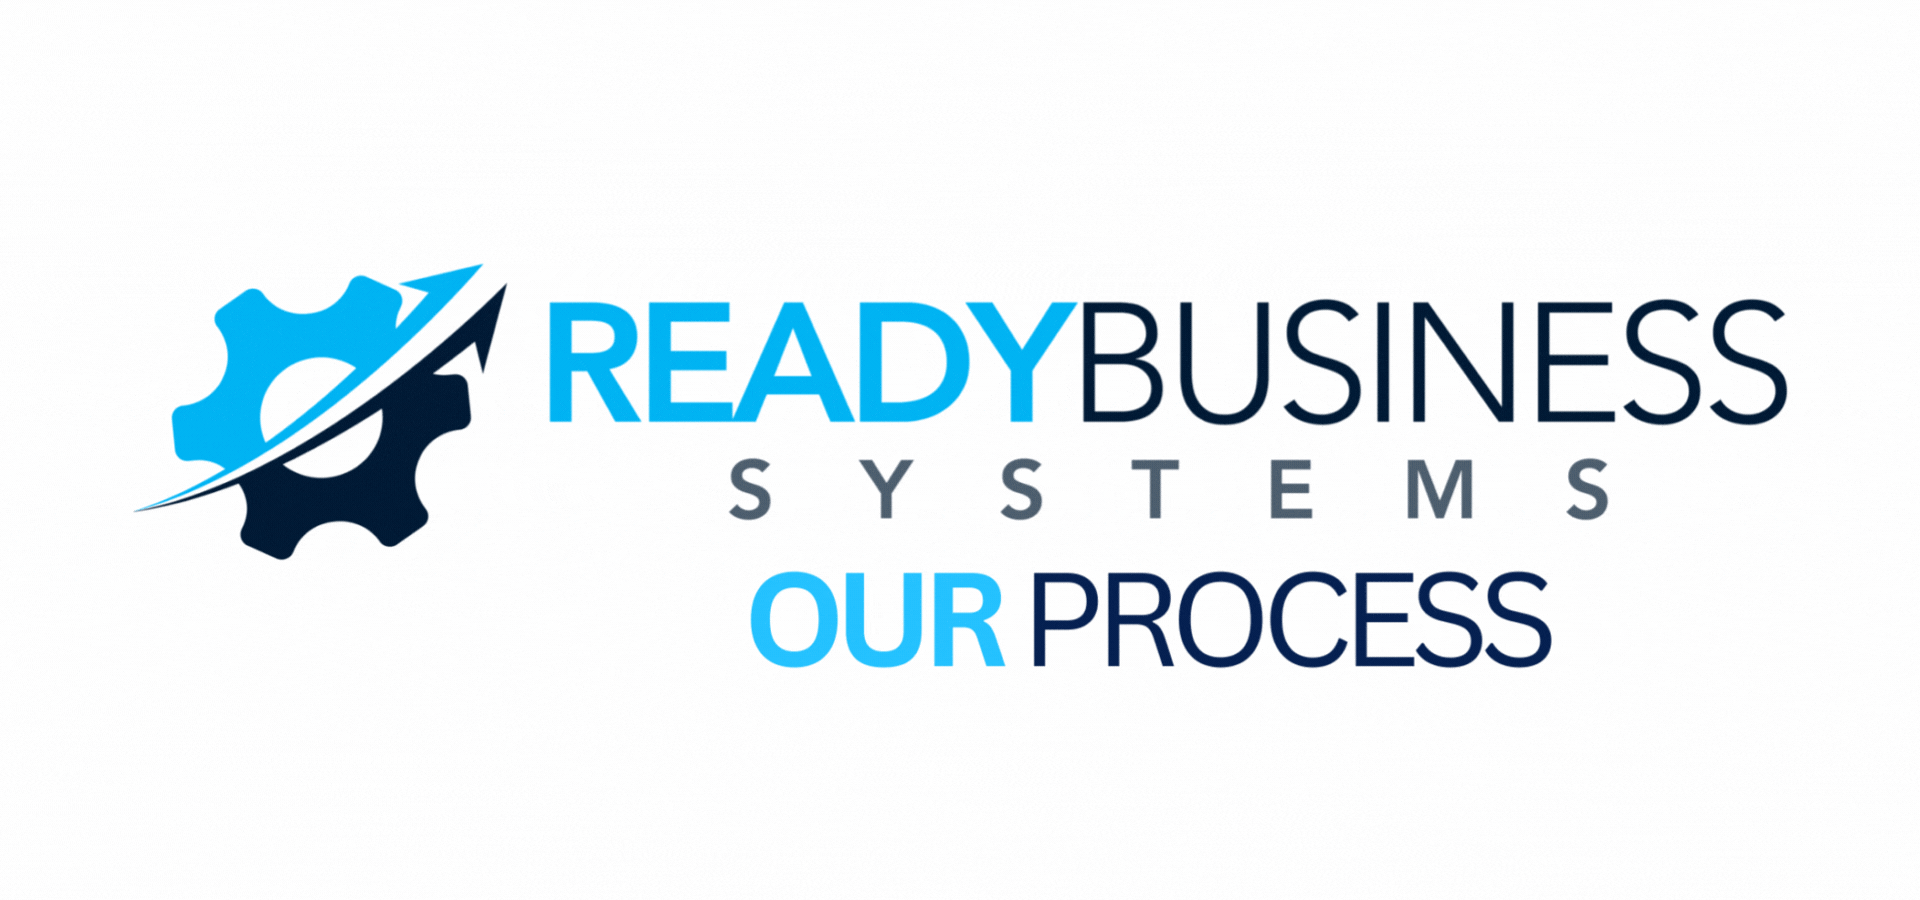 Ready Business Systems Our Process